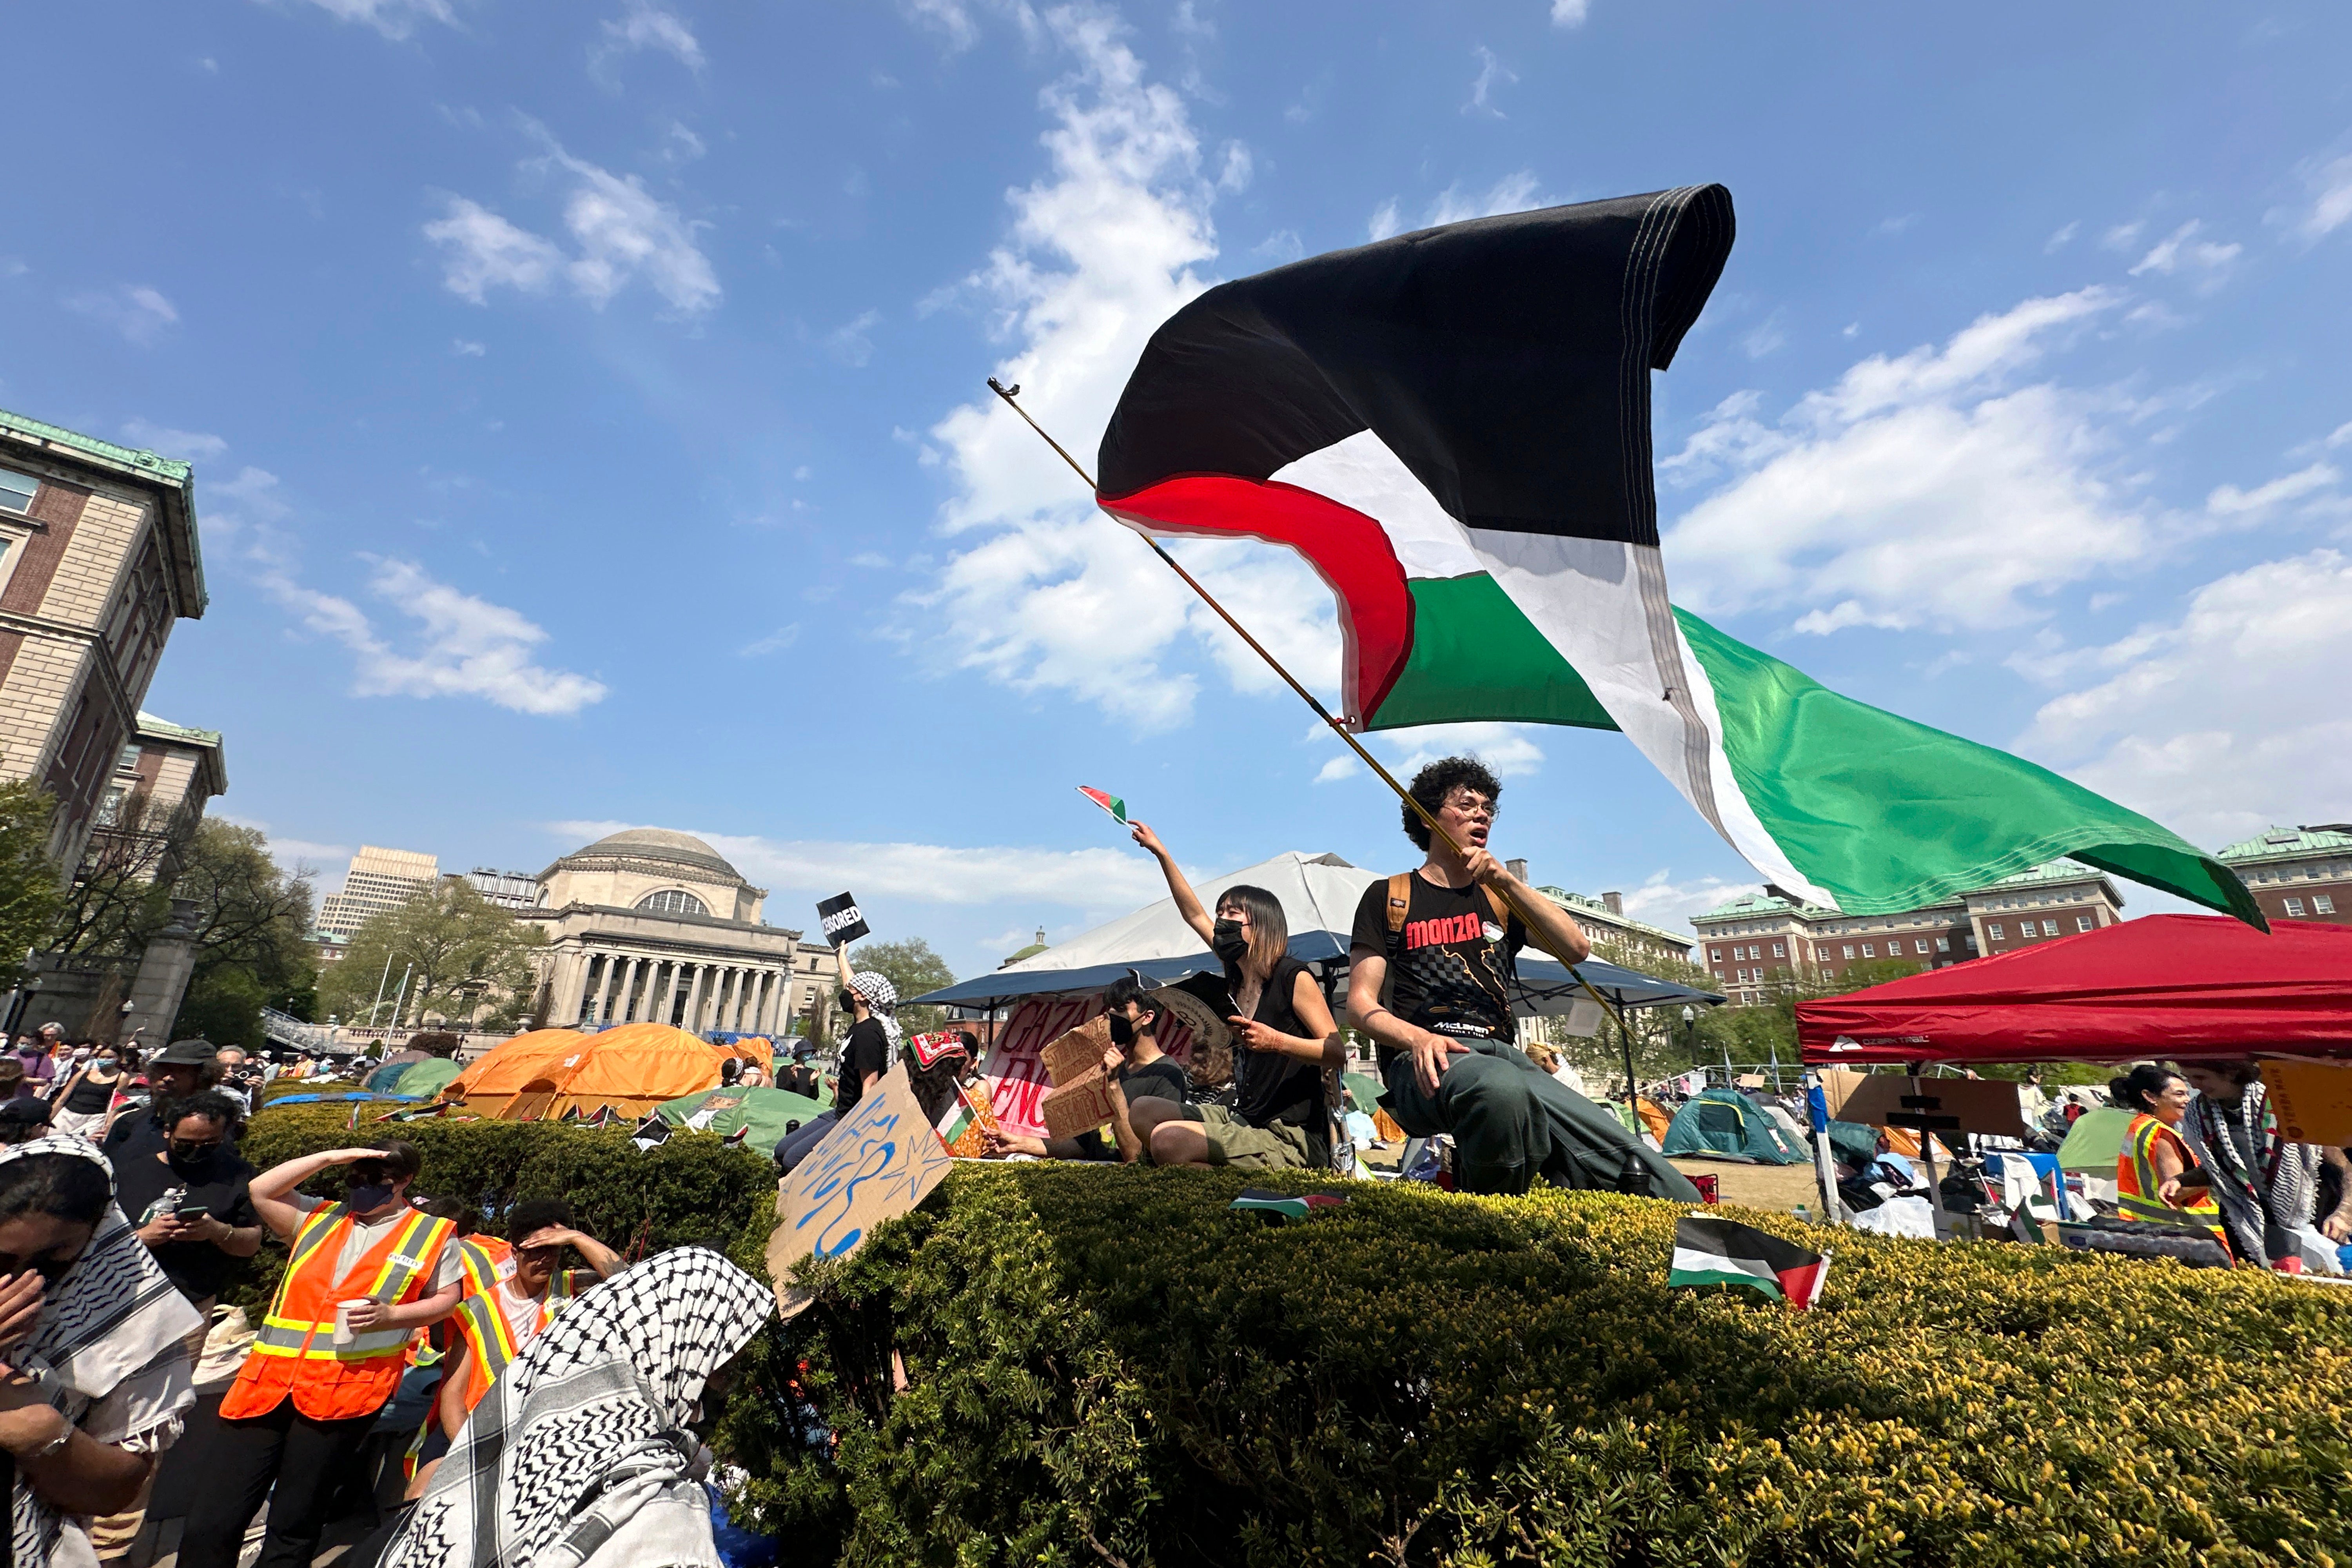 Demonstrators are on the Columbia University campus in New York at a pro-Palestinian protest encampment on April 29